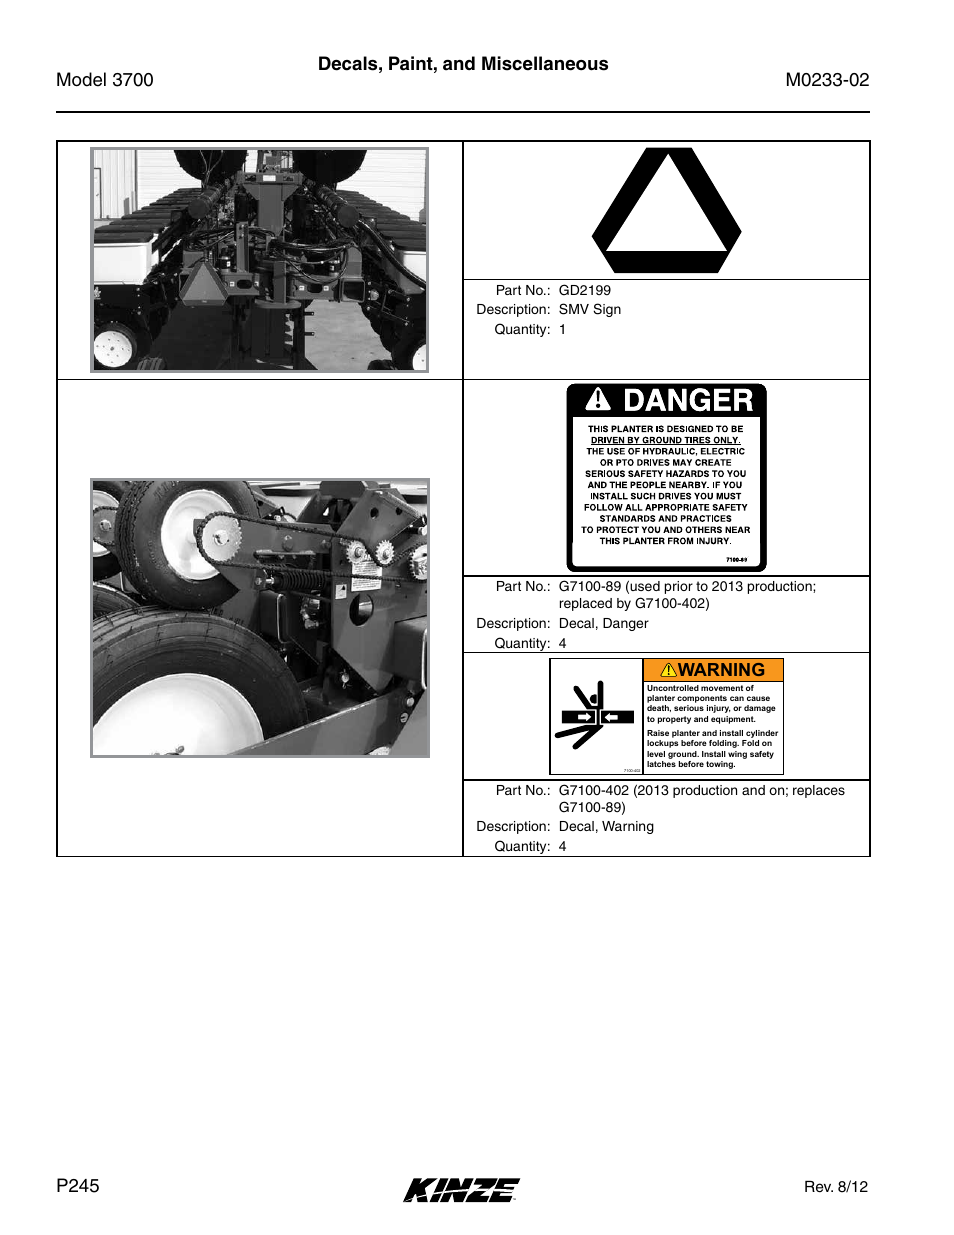 Decals, paint, and miscellaneous, Decals, paint, and miscellaneous . . . . p245, Warning | Kinze 3700 Front Folding Planter Rev. 6/14 User Manual | Page 248 / 284